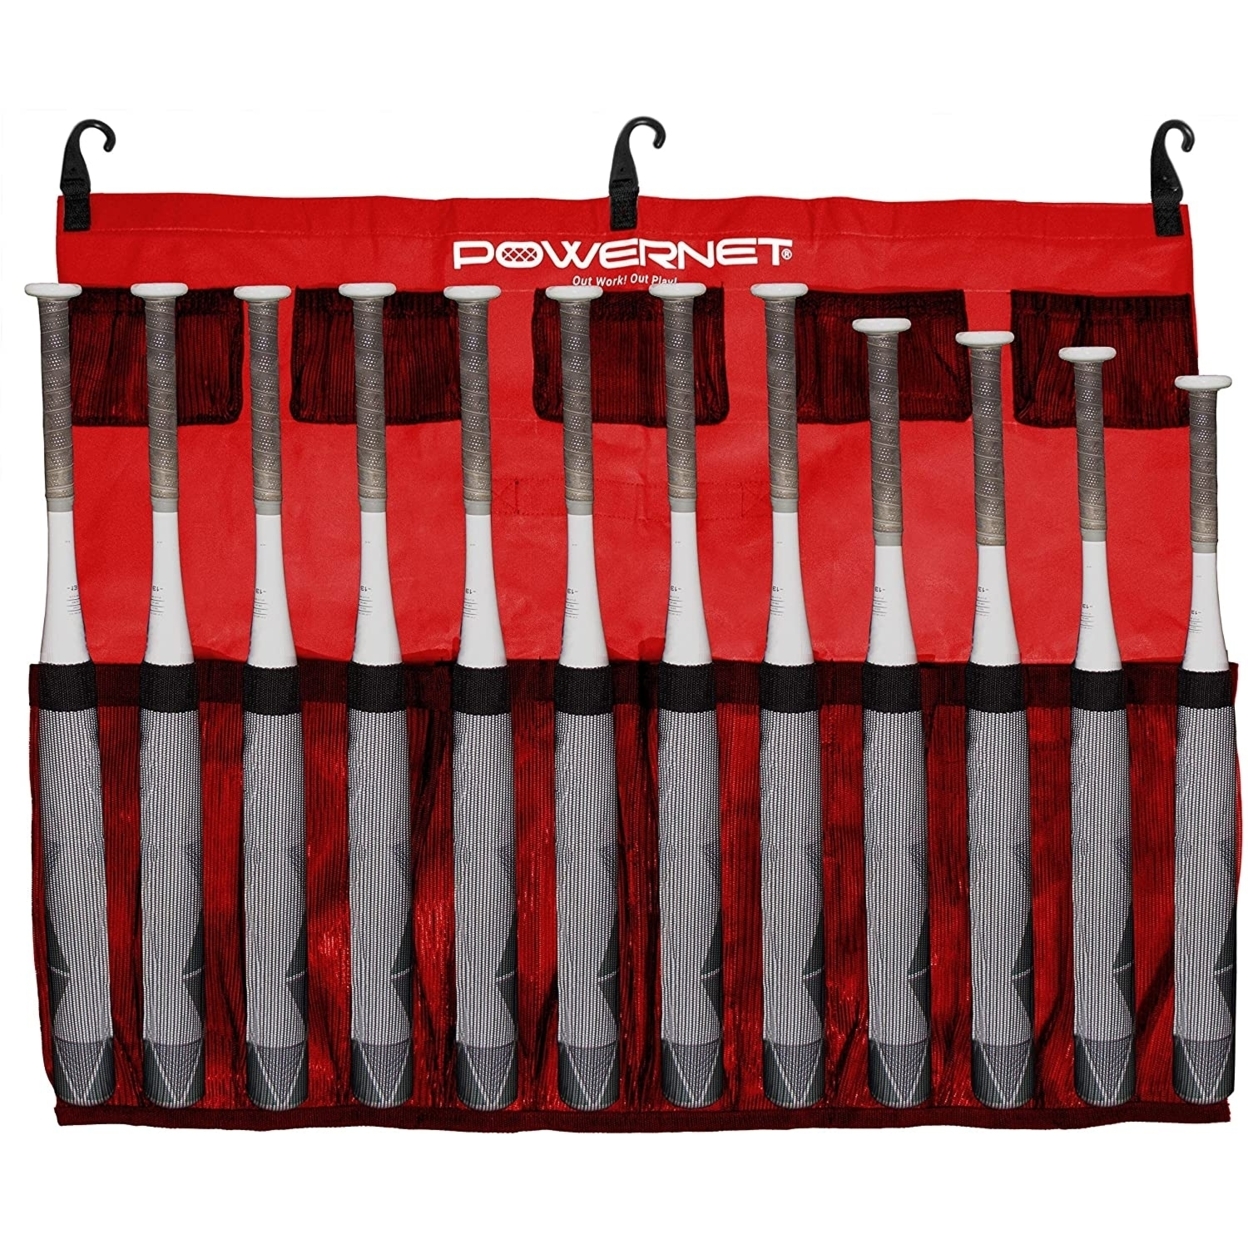 PowerNet Hanging Bat Bag Caddy For Hanging Up To 12 Bats On Fence (1169) - Red